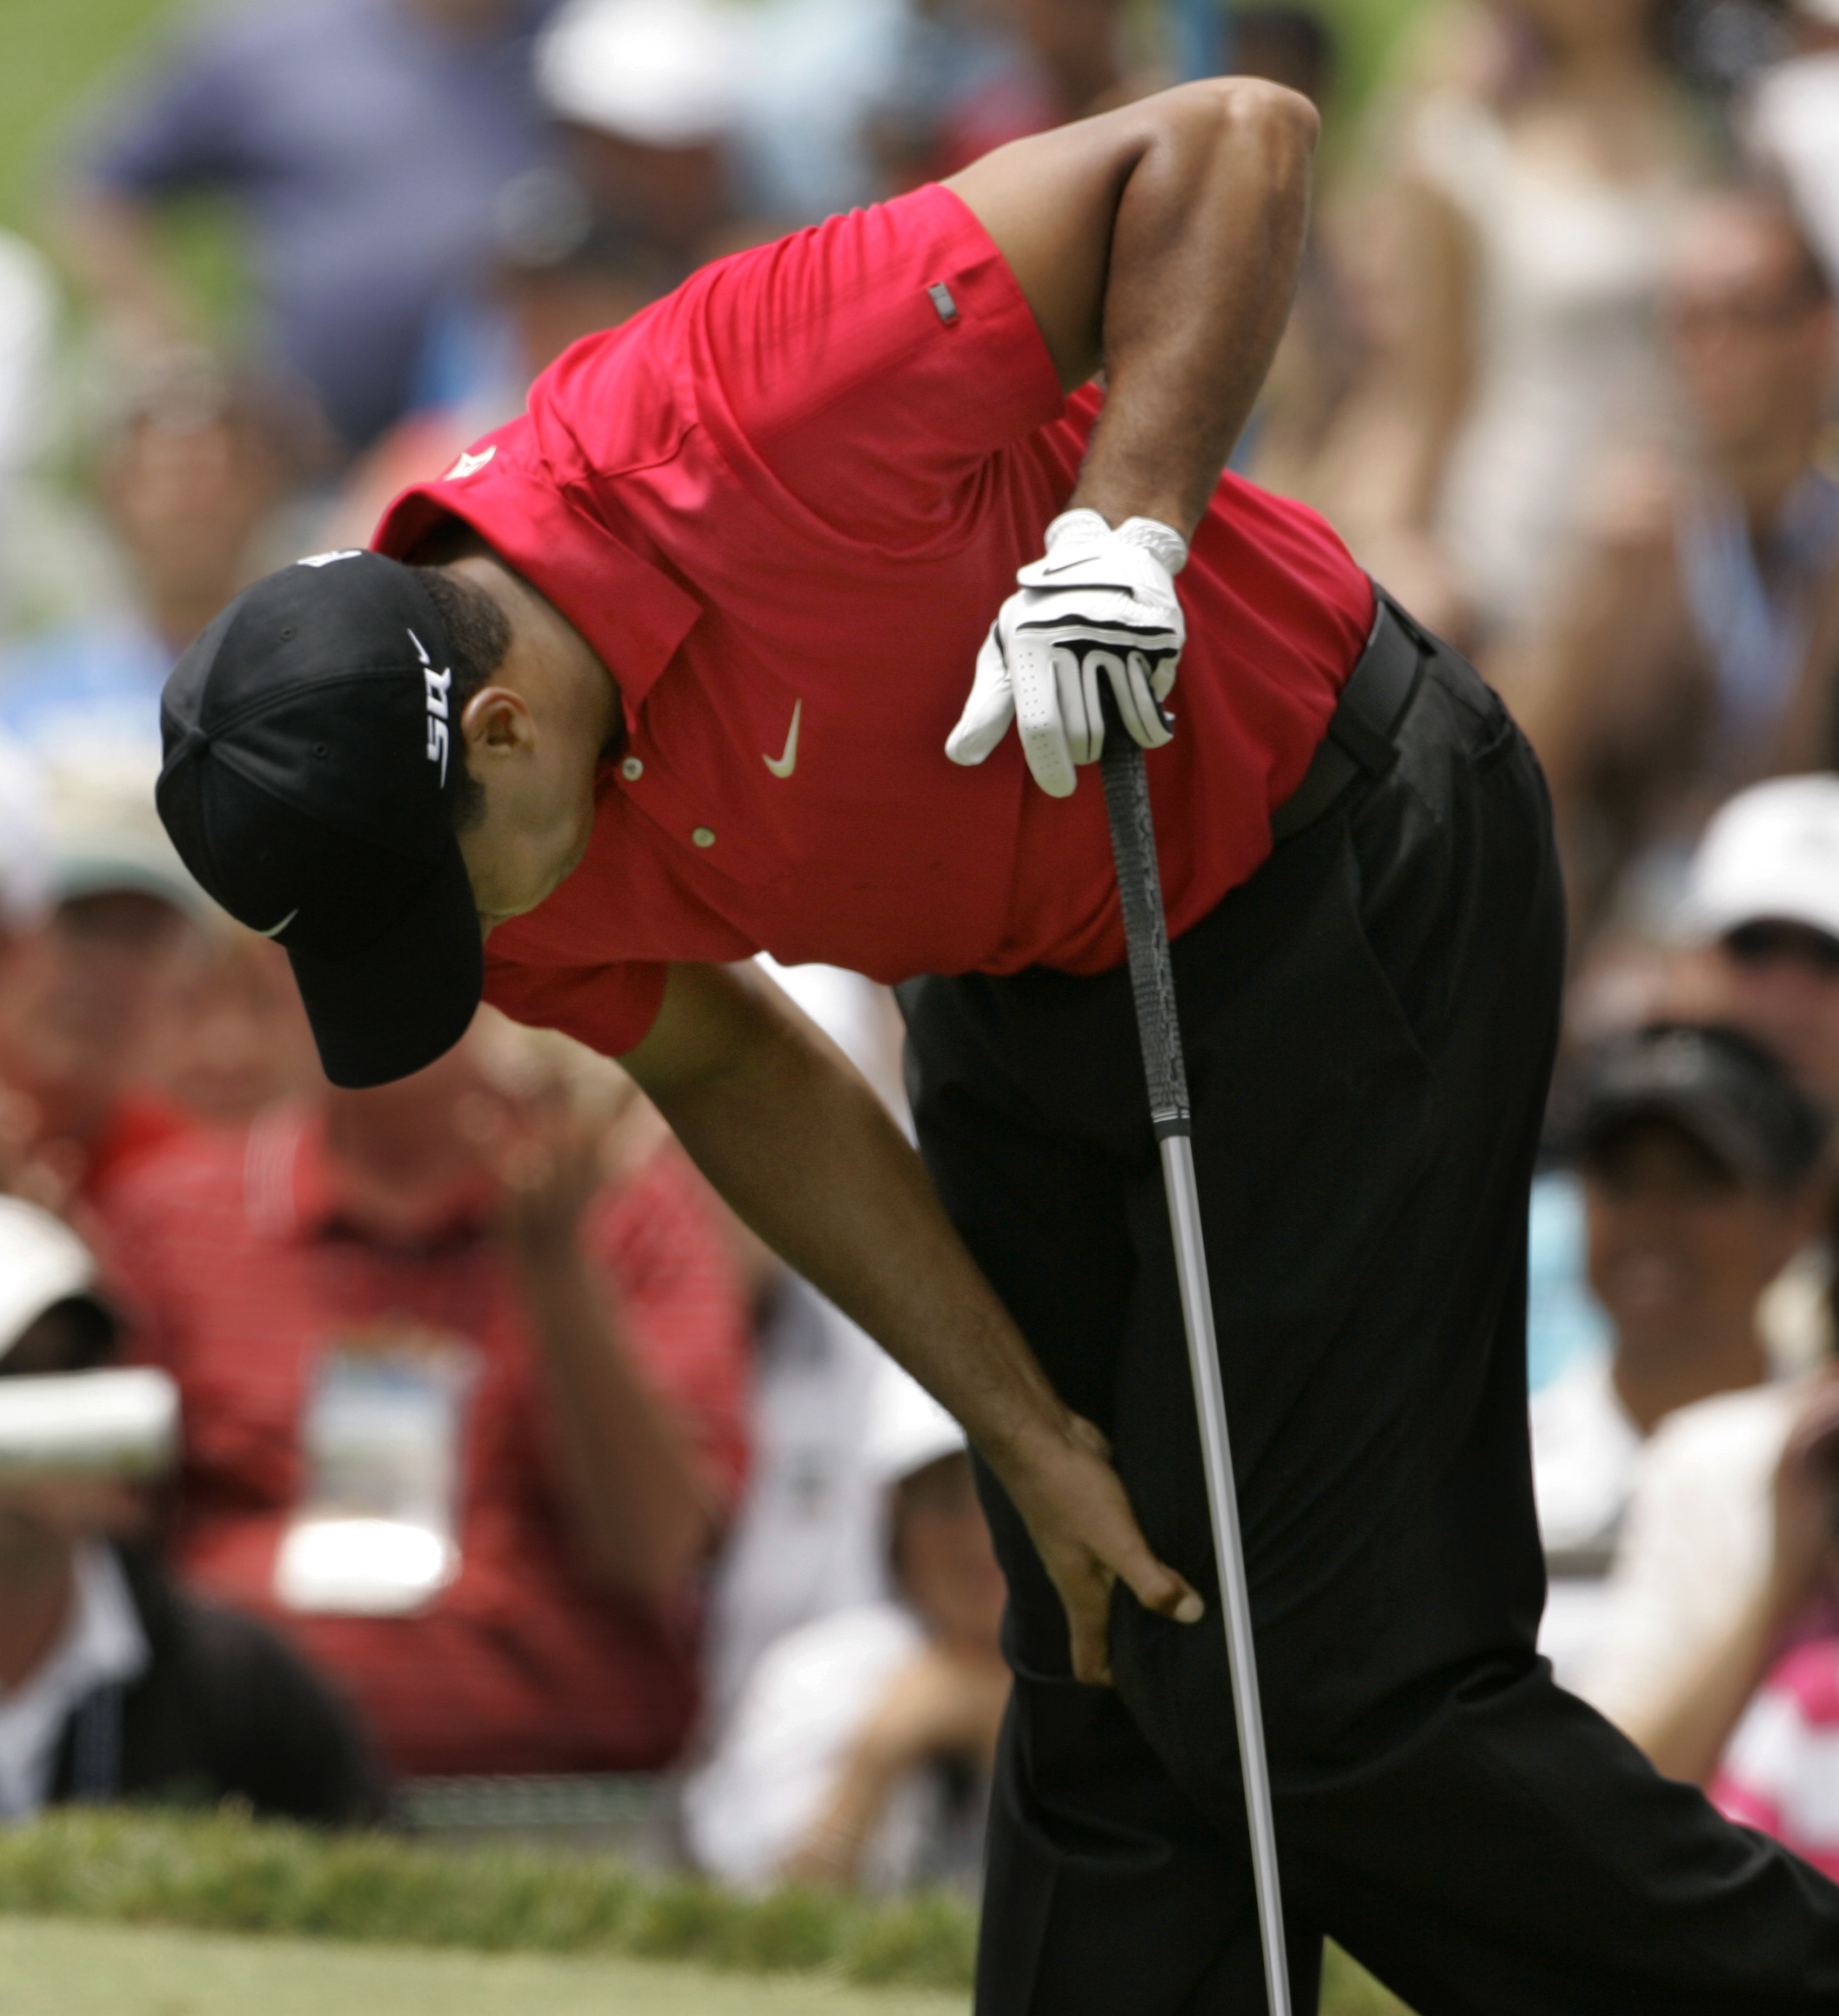 Tiger Woods holds his left knee after teeing off on the second hole during the fourth round of the 2008 U.S. Open at Torrey Pines in San Diego. Woods had reconstructive surgery on his left knee Tuesday, June 24, 2008, in Utah to repair a torn ligament. Woods went on to win in a playoff over Rocco Mediate.